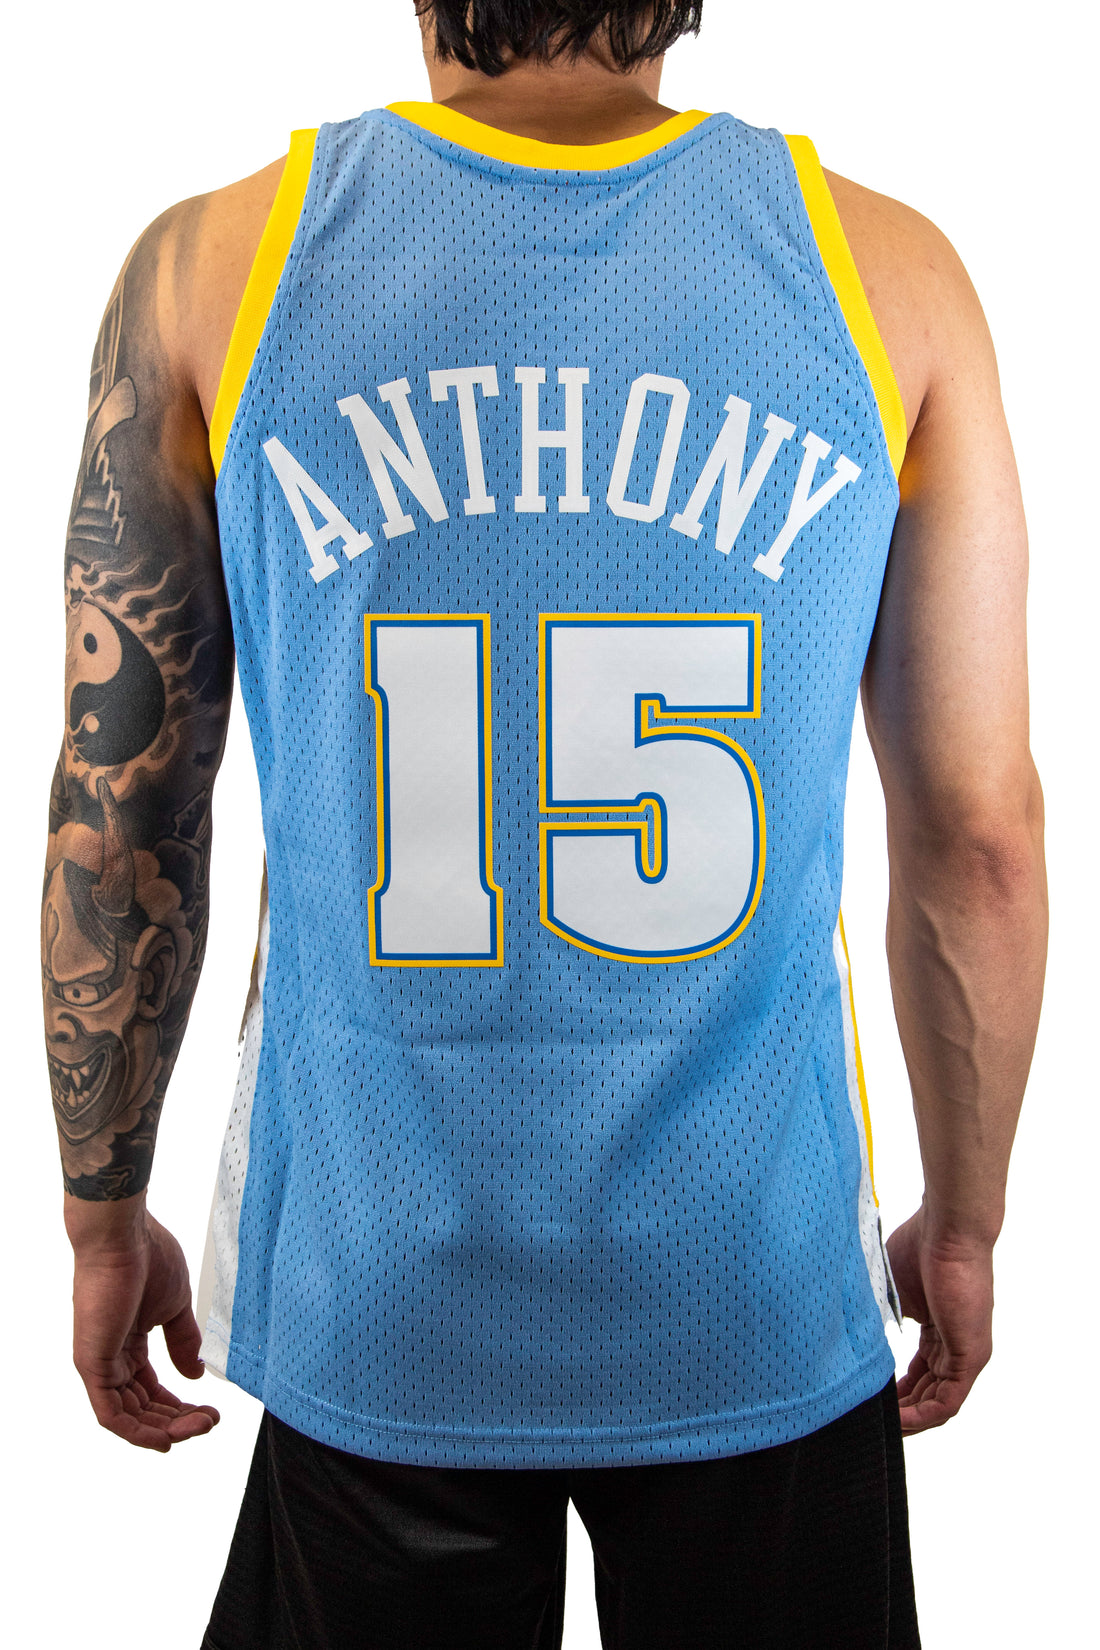 Mitchell & Ness: Hardwood Classic Denver Nuggets Jersey (Carmelo Anthony)